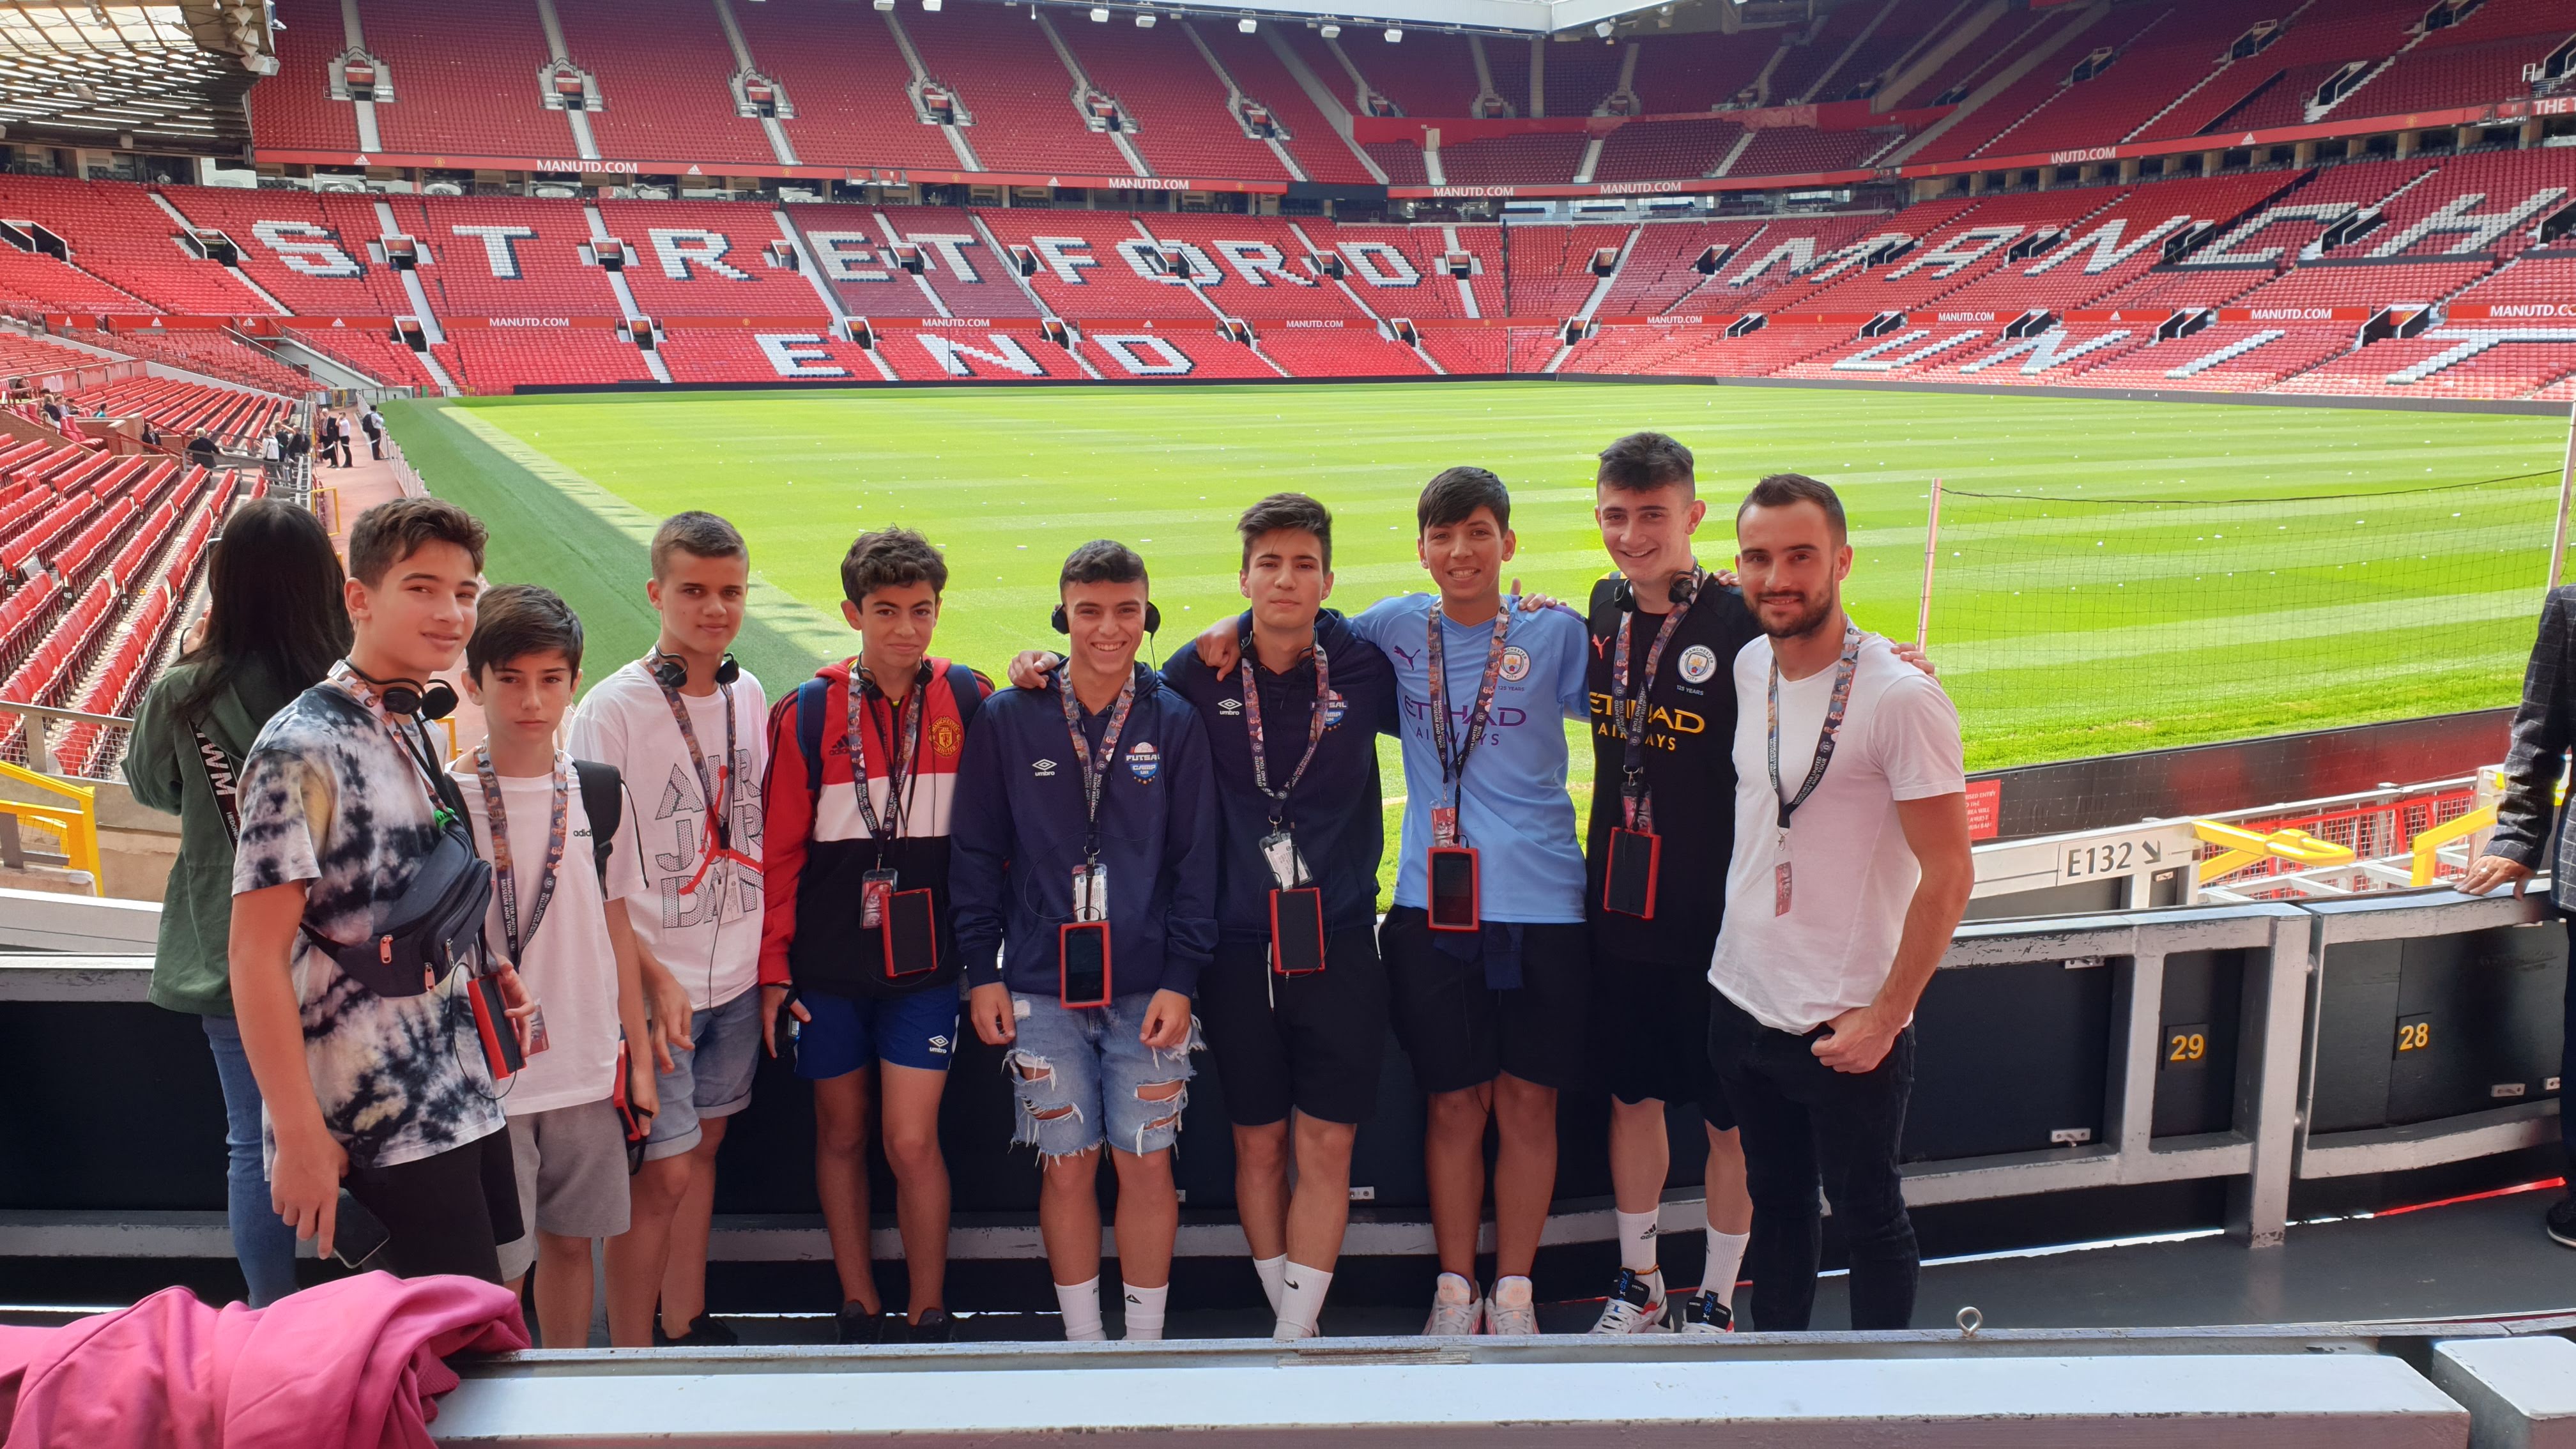 Day trip to Old Trafford, home of Manchester United